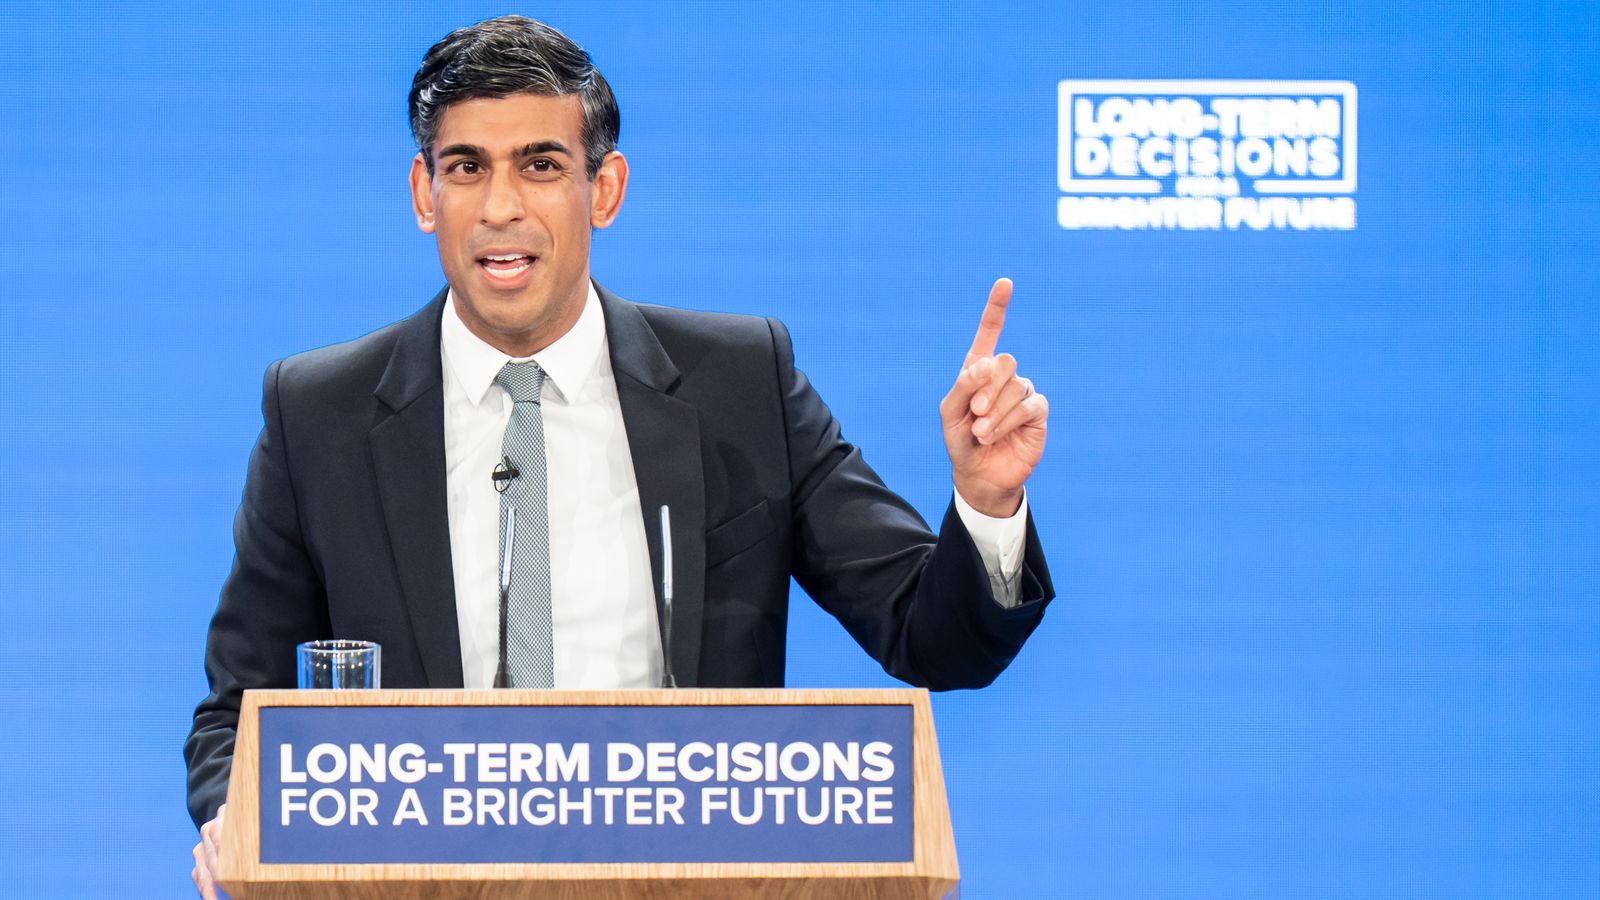 The irony of Rishi Sunak's long-term vision is the short-term political calculation behind it